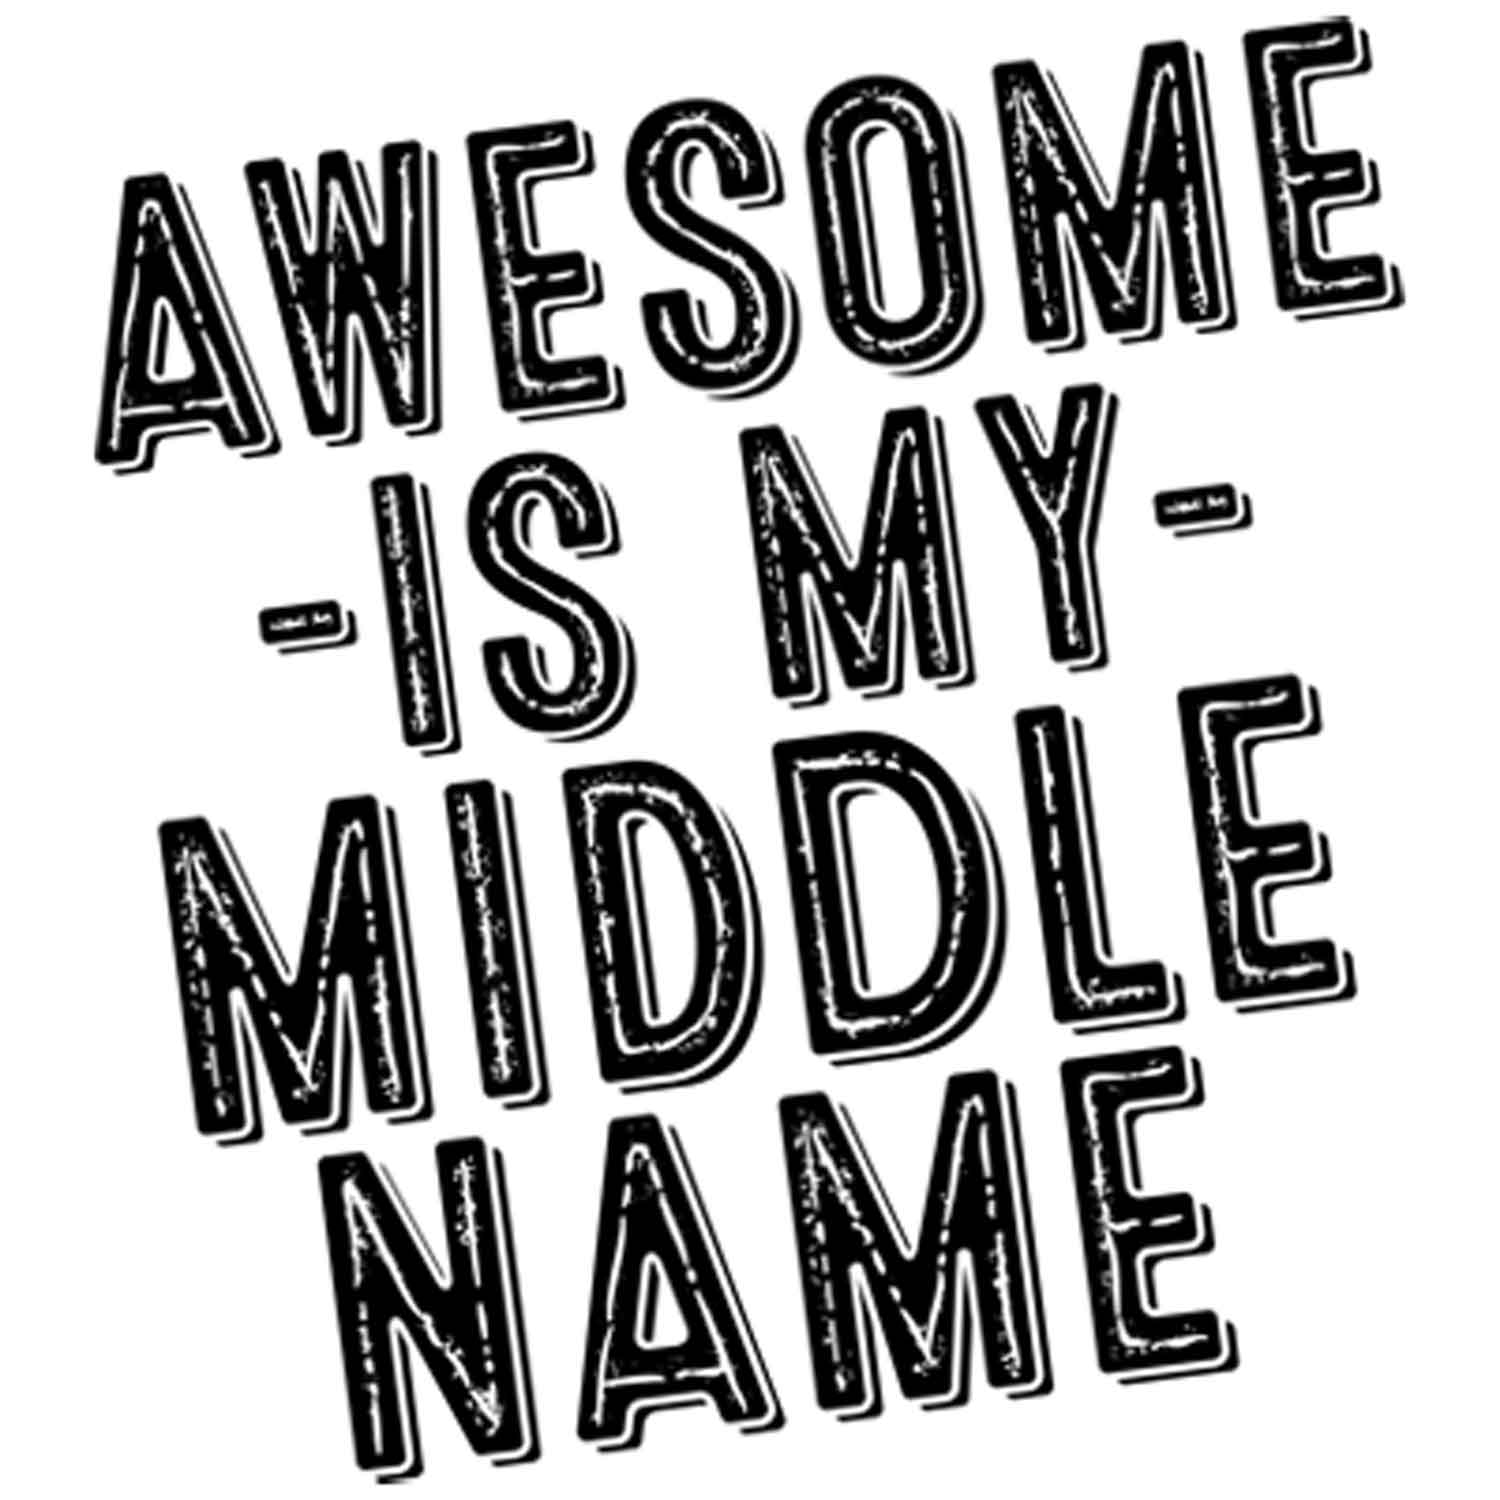 Awesome Is My Middle Name Printed T-Shirt-White